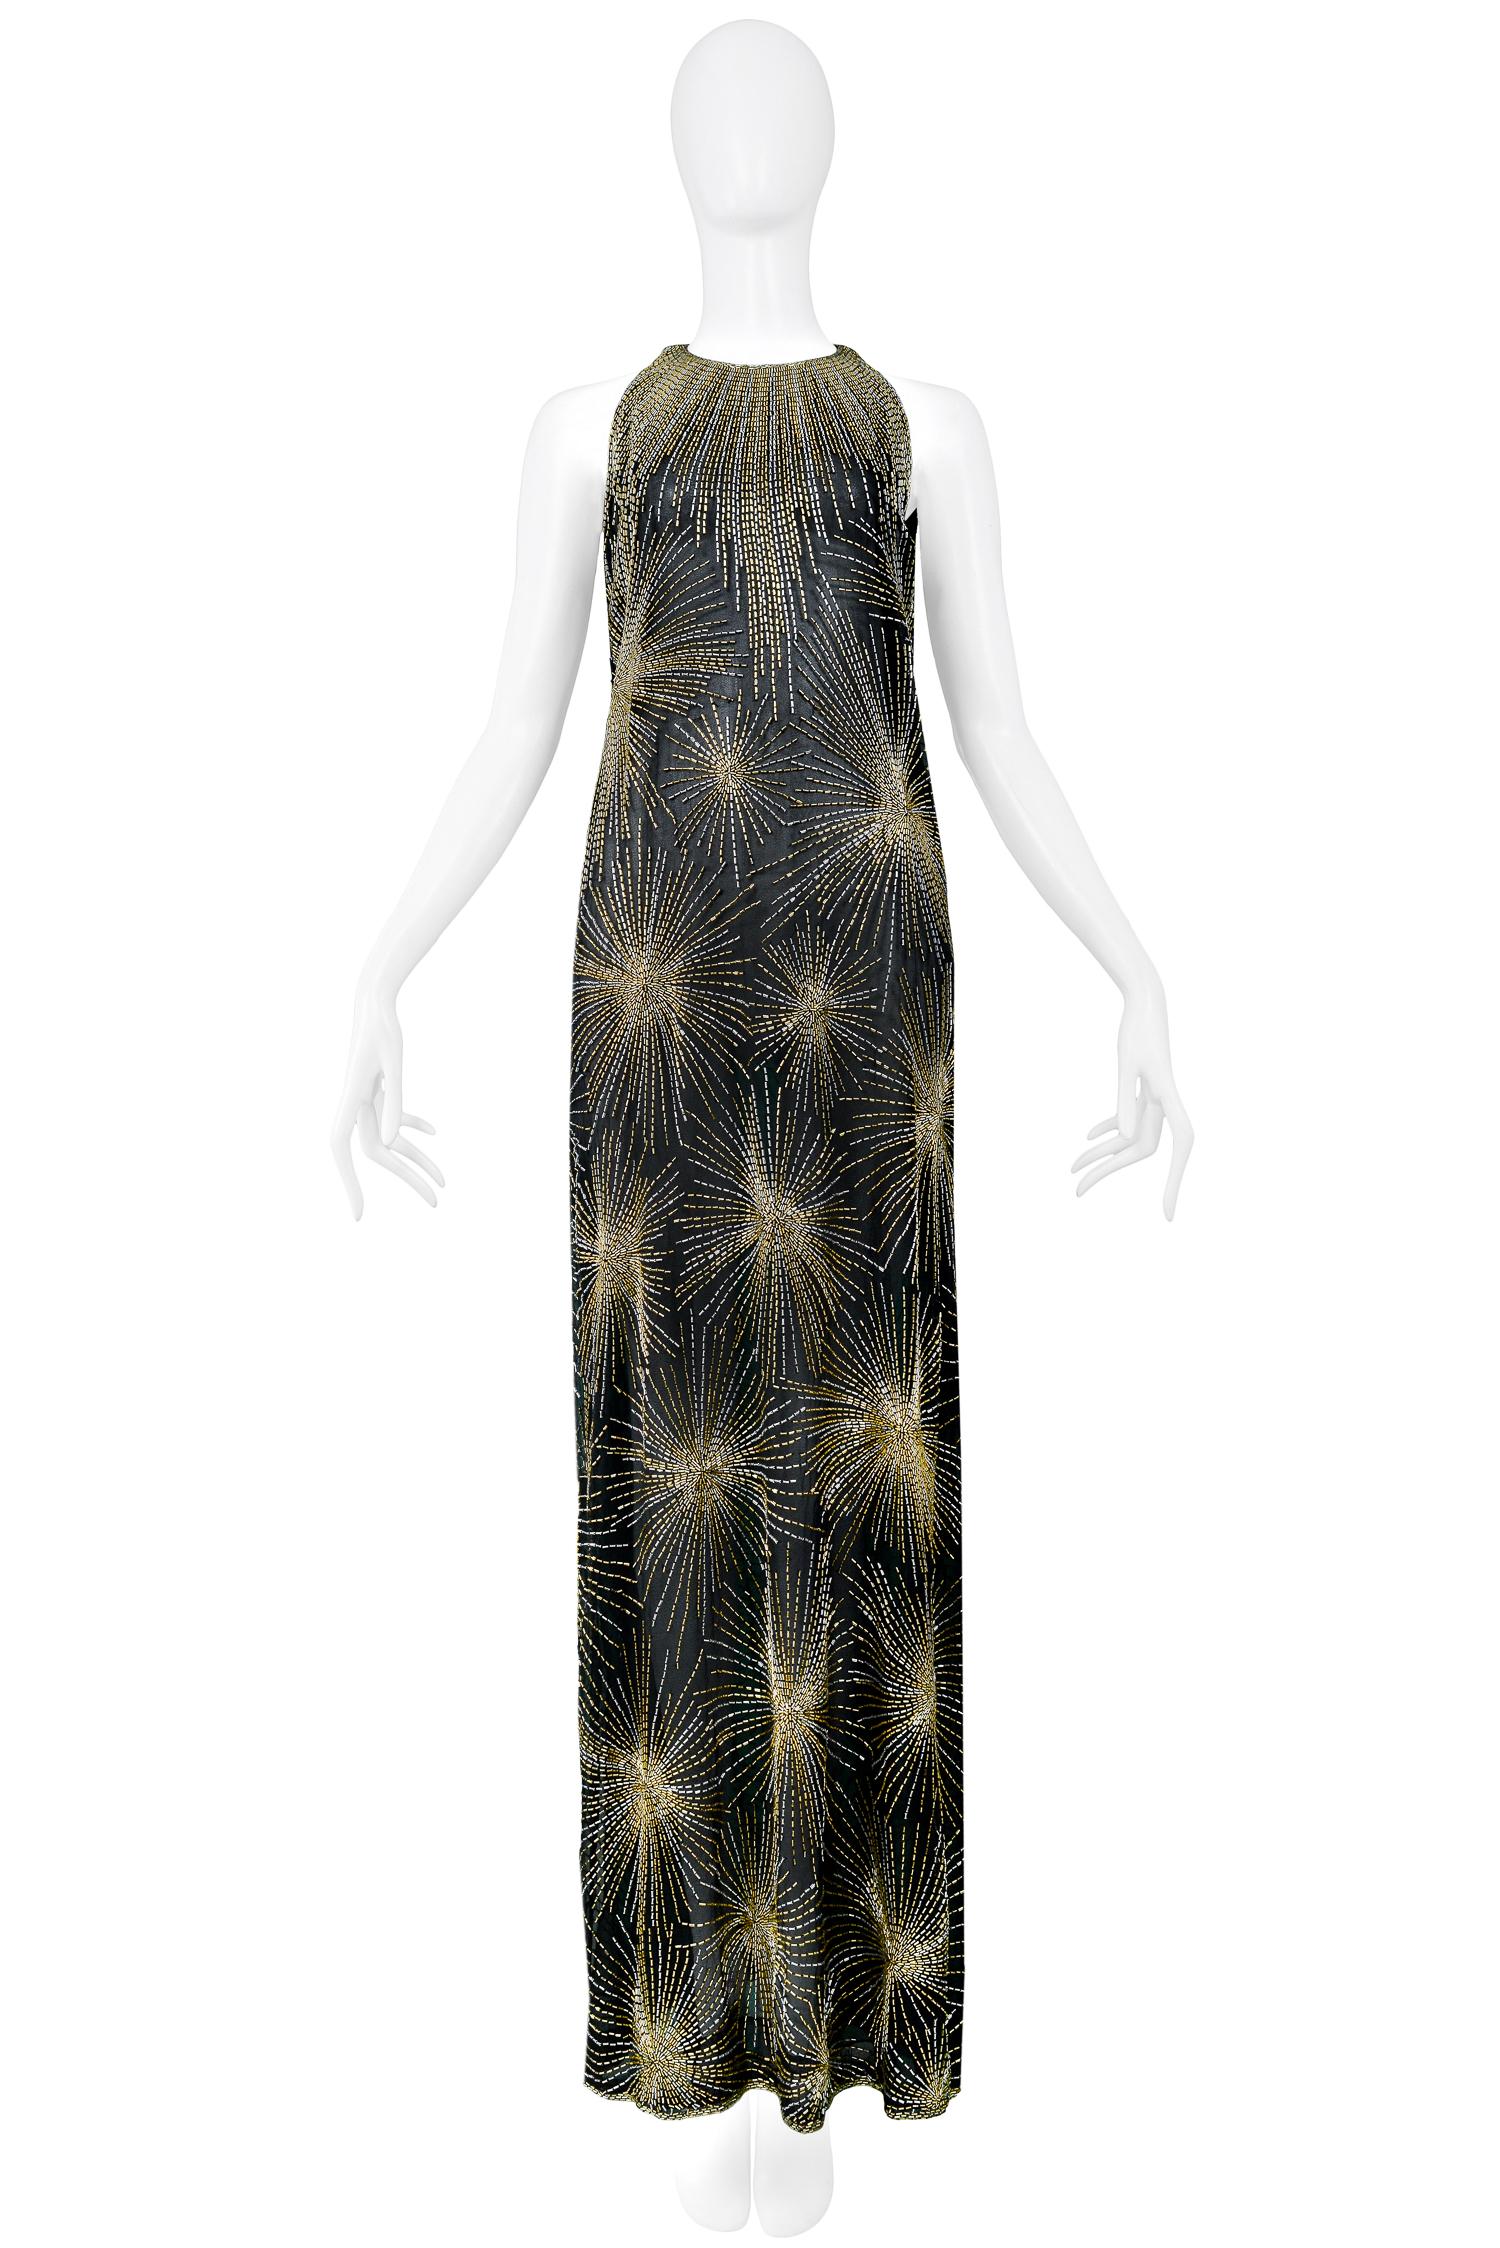 Vintage Halston black chiffon sleeveless a-line gown featuring allover gold & silver beaded firework bursts and a cascade of beads at the neckline. From the Autumn/Winter 1980 Collection.

Excellent Condition.

Size: SMALL
